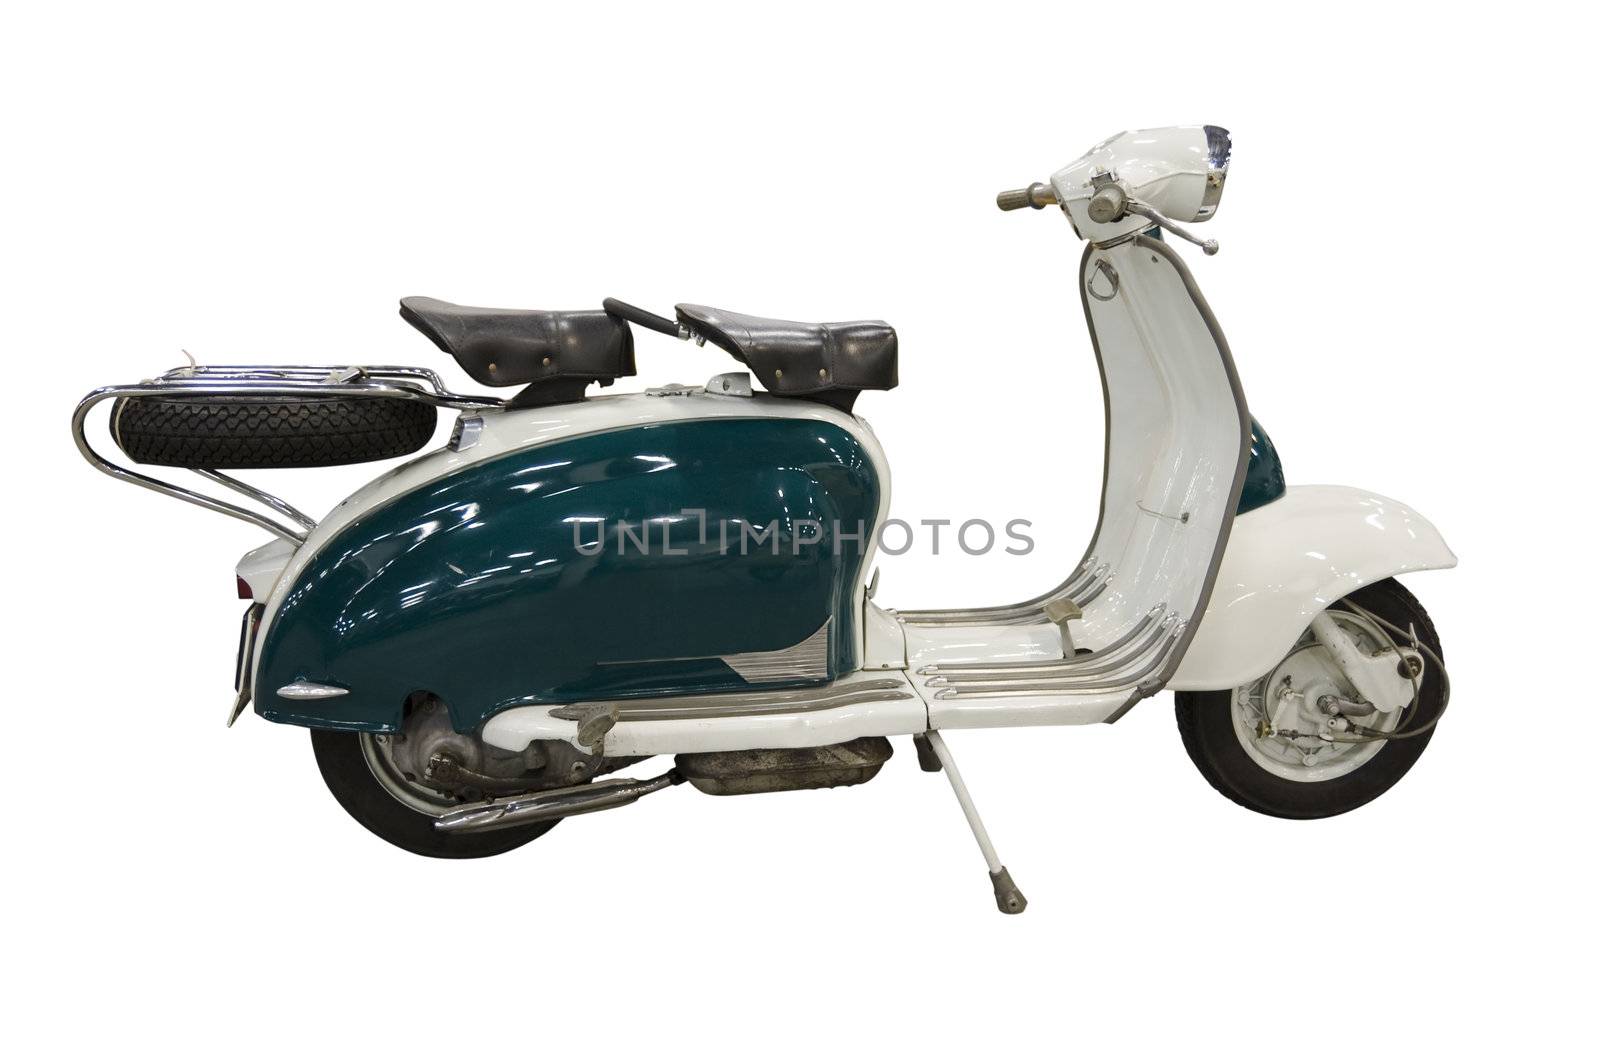 Vintage green and white scooter (path included) by simas2